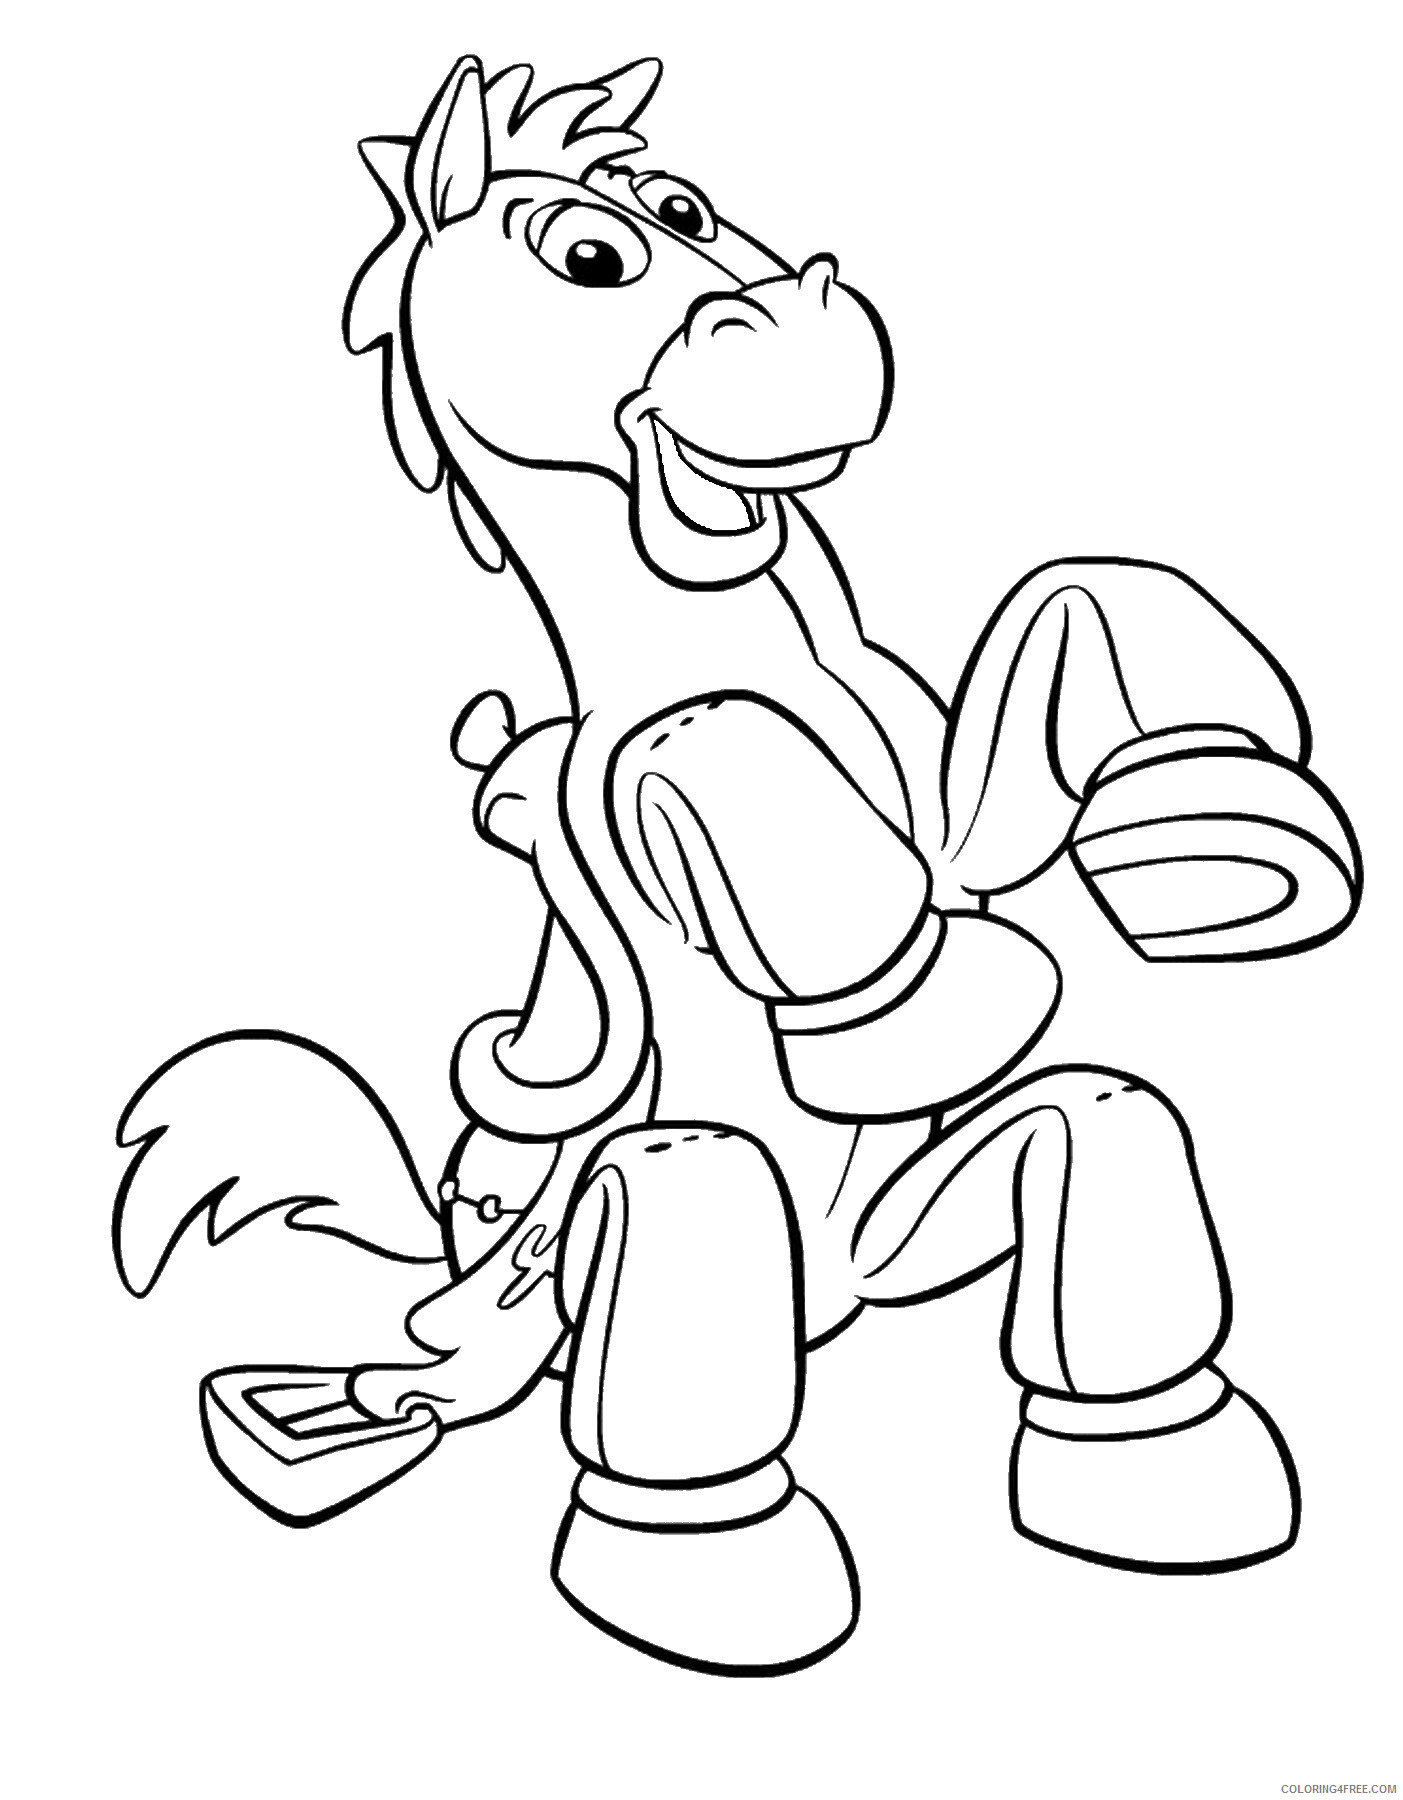 Toy Story Coloring Pages TV Film toystory_74 Printable 2020 10388 Coloring4free